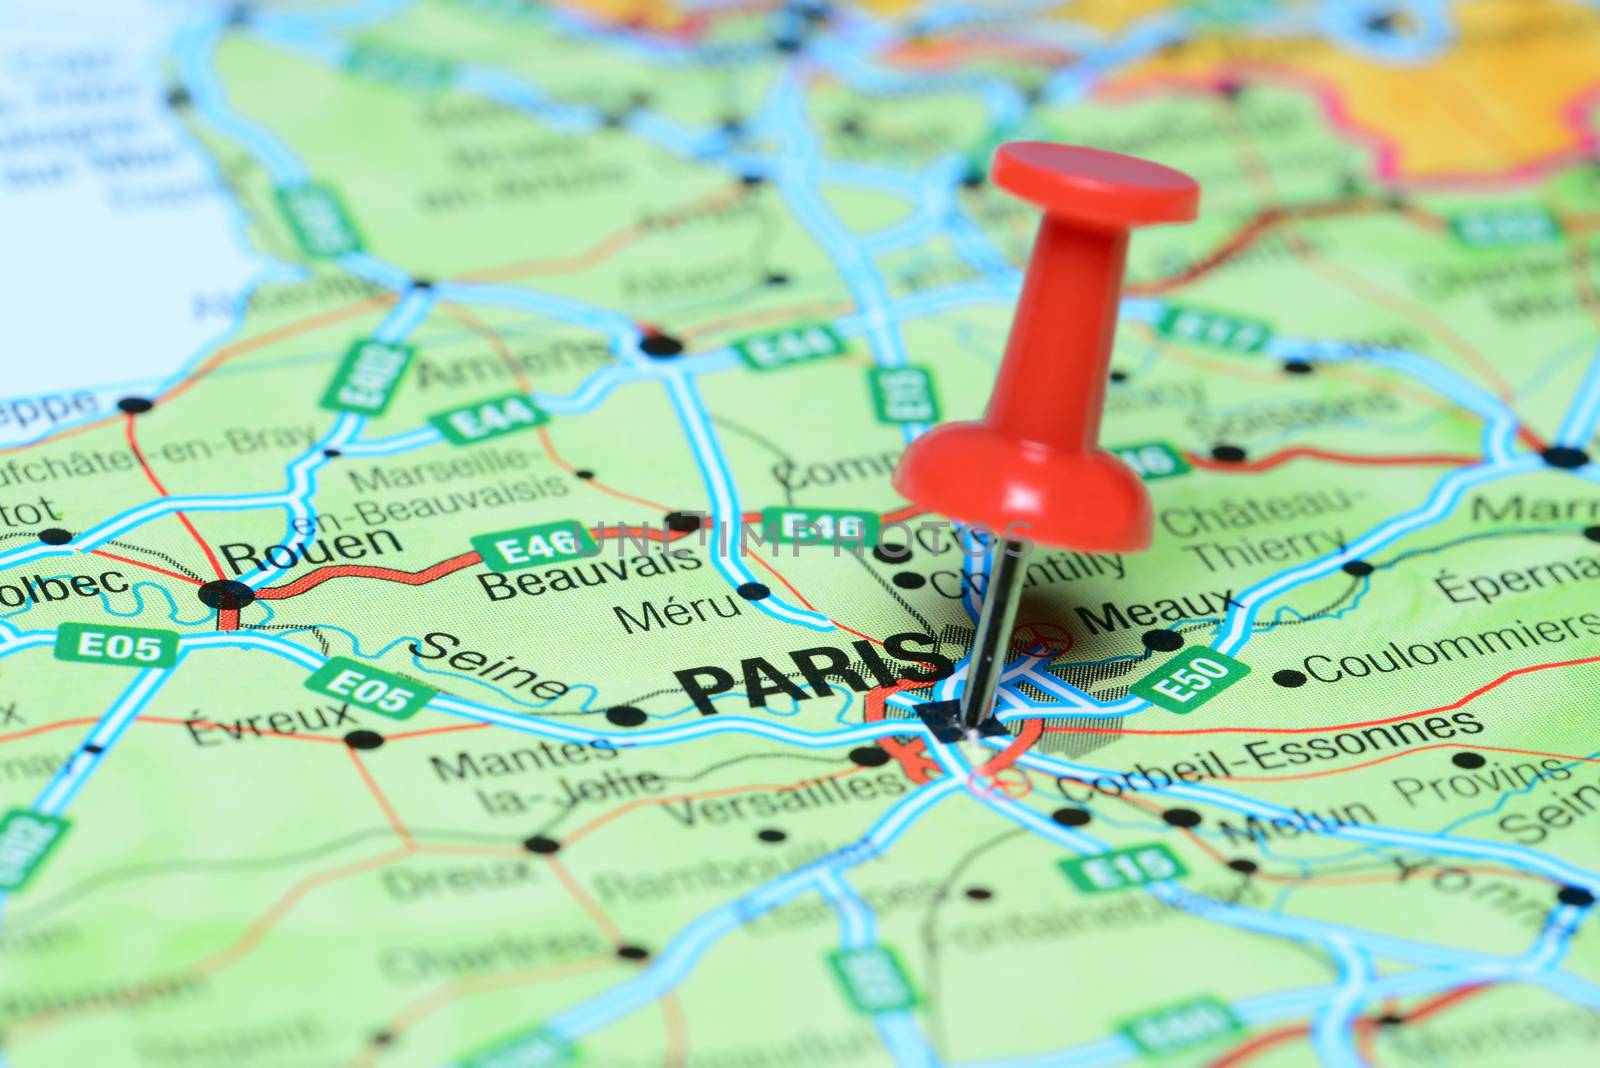 Photo of pinned Paris on a map of europe. May be used as illustration for traveling theme.